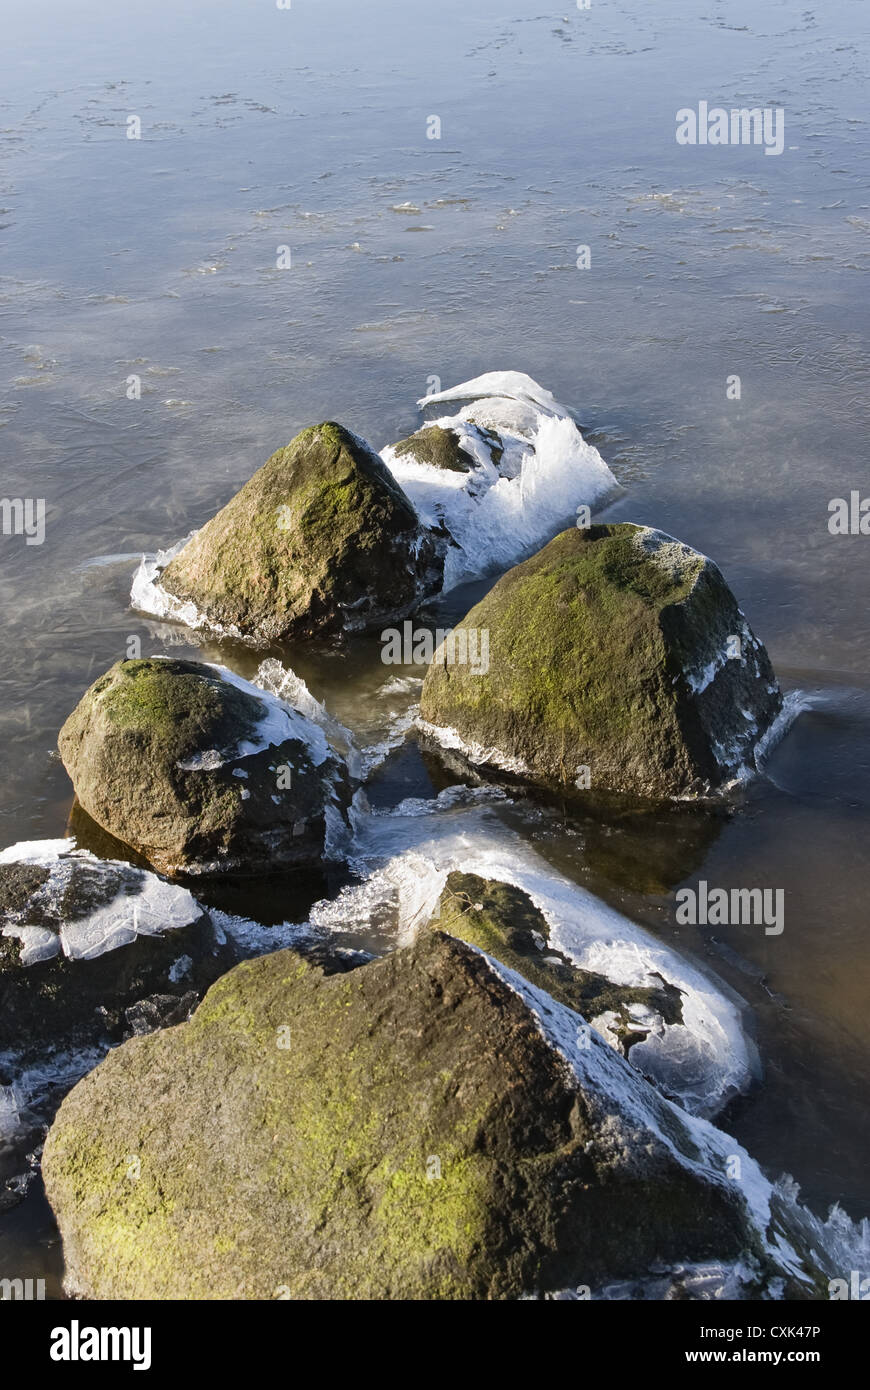 Stone in the water with ice crystals Stock Photo